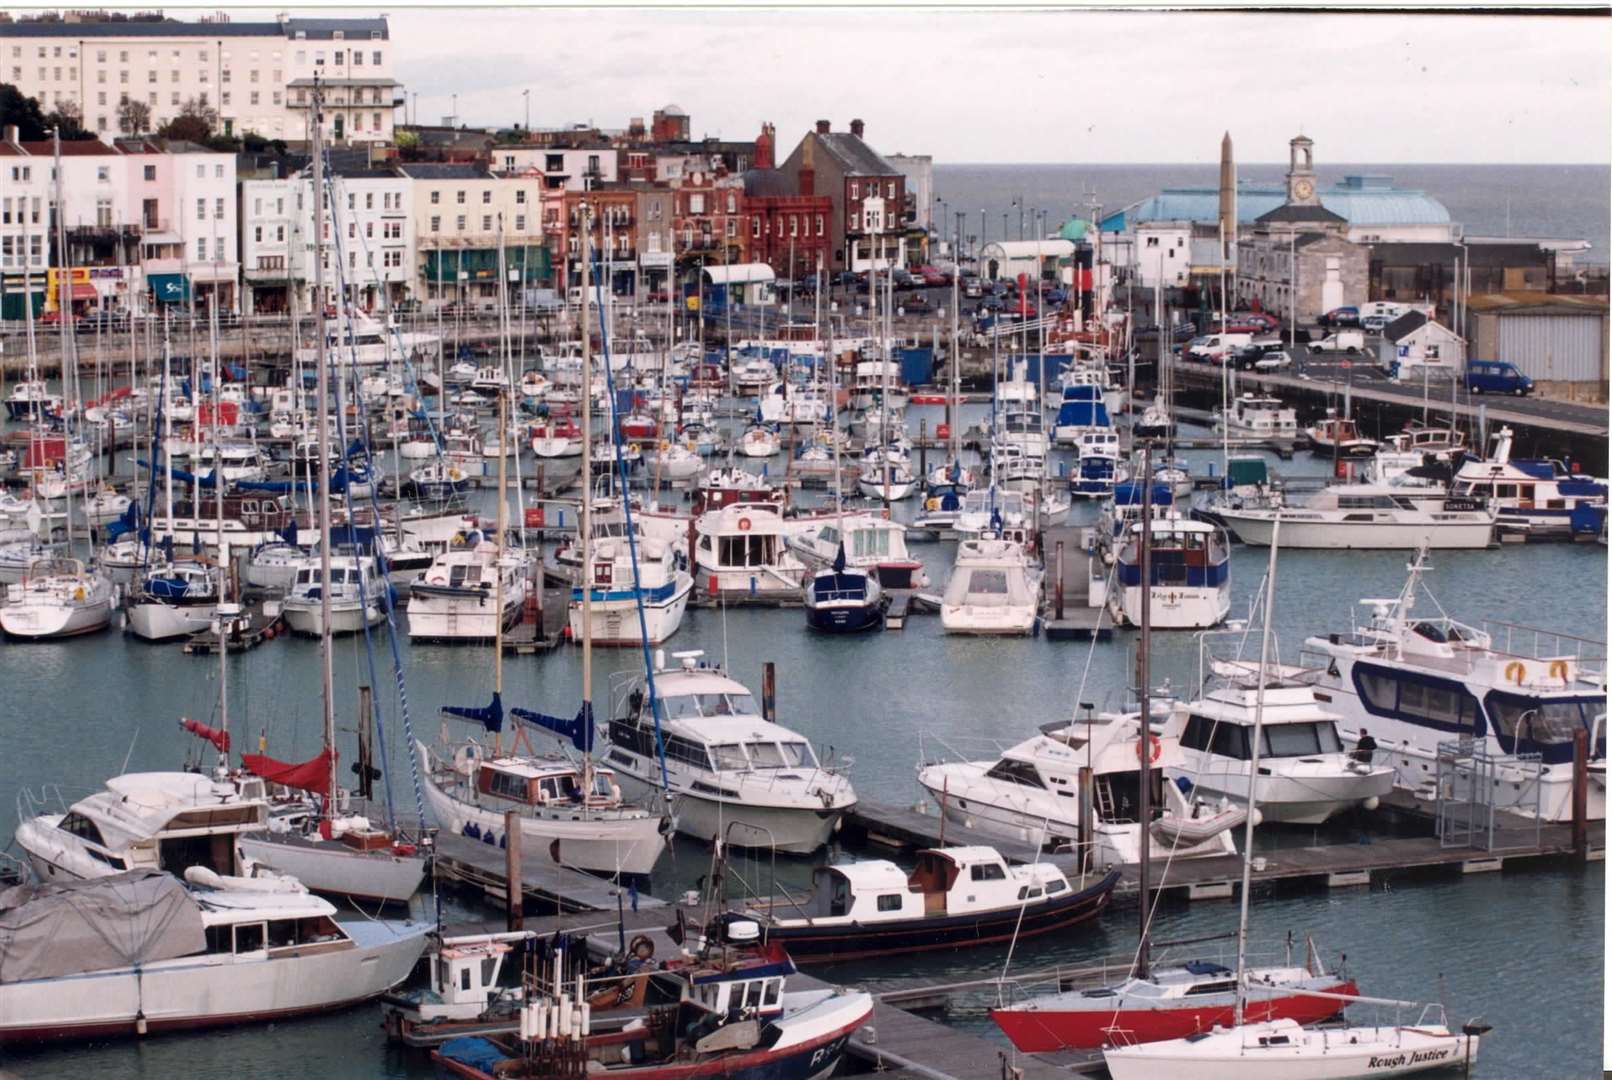 Ramsgate harbour pictured in 1998